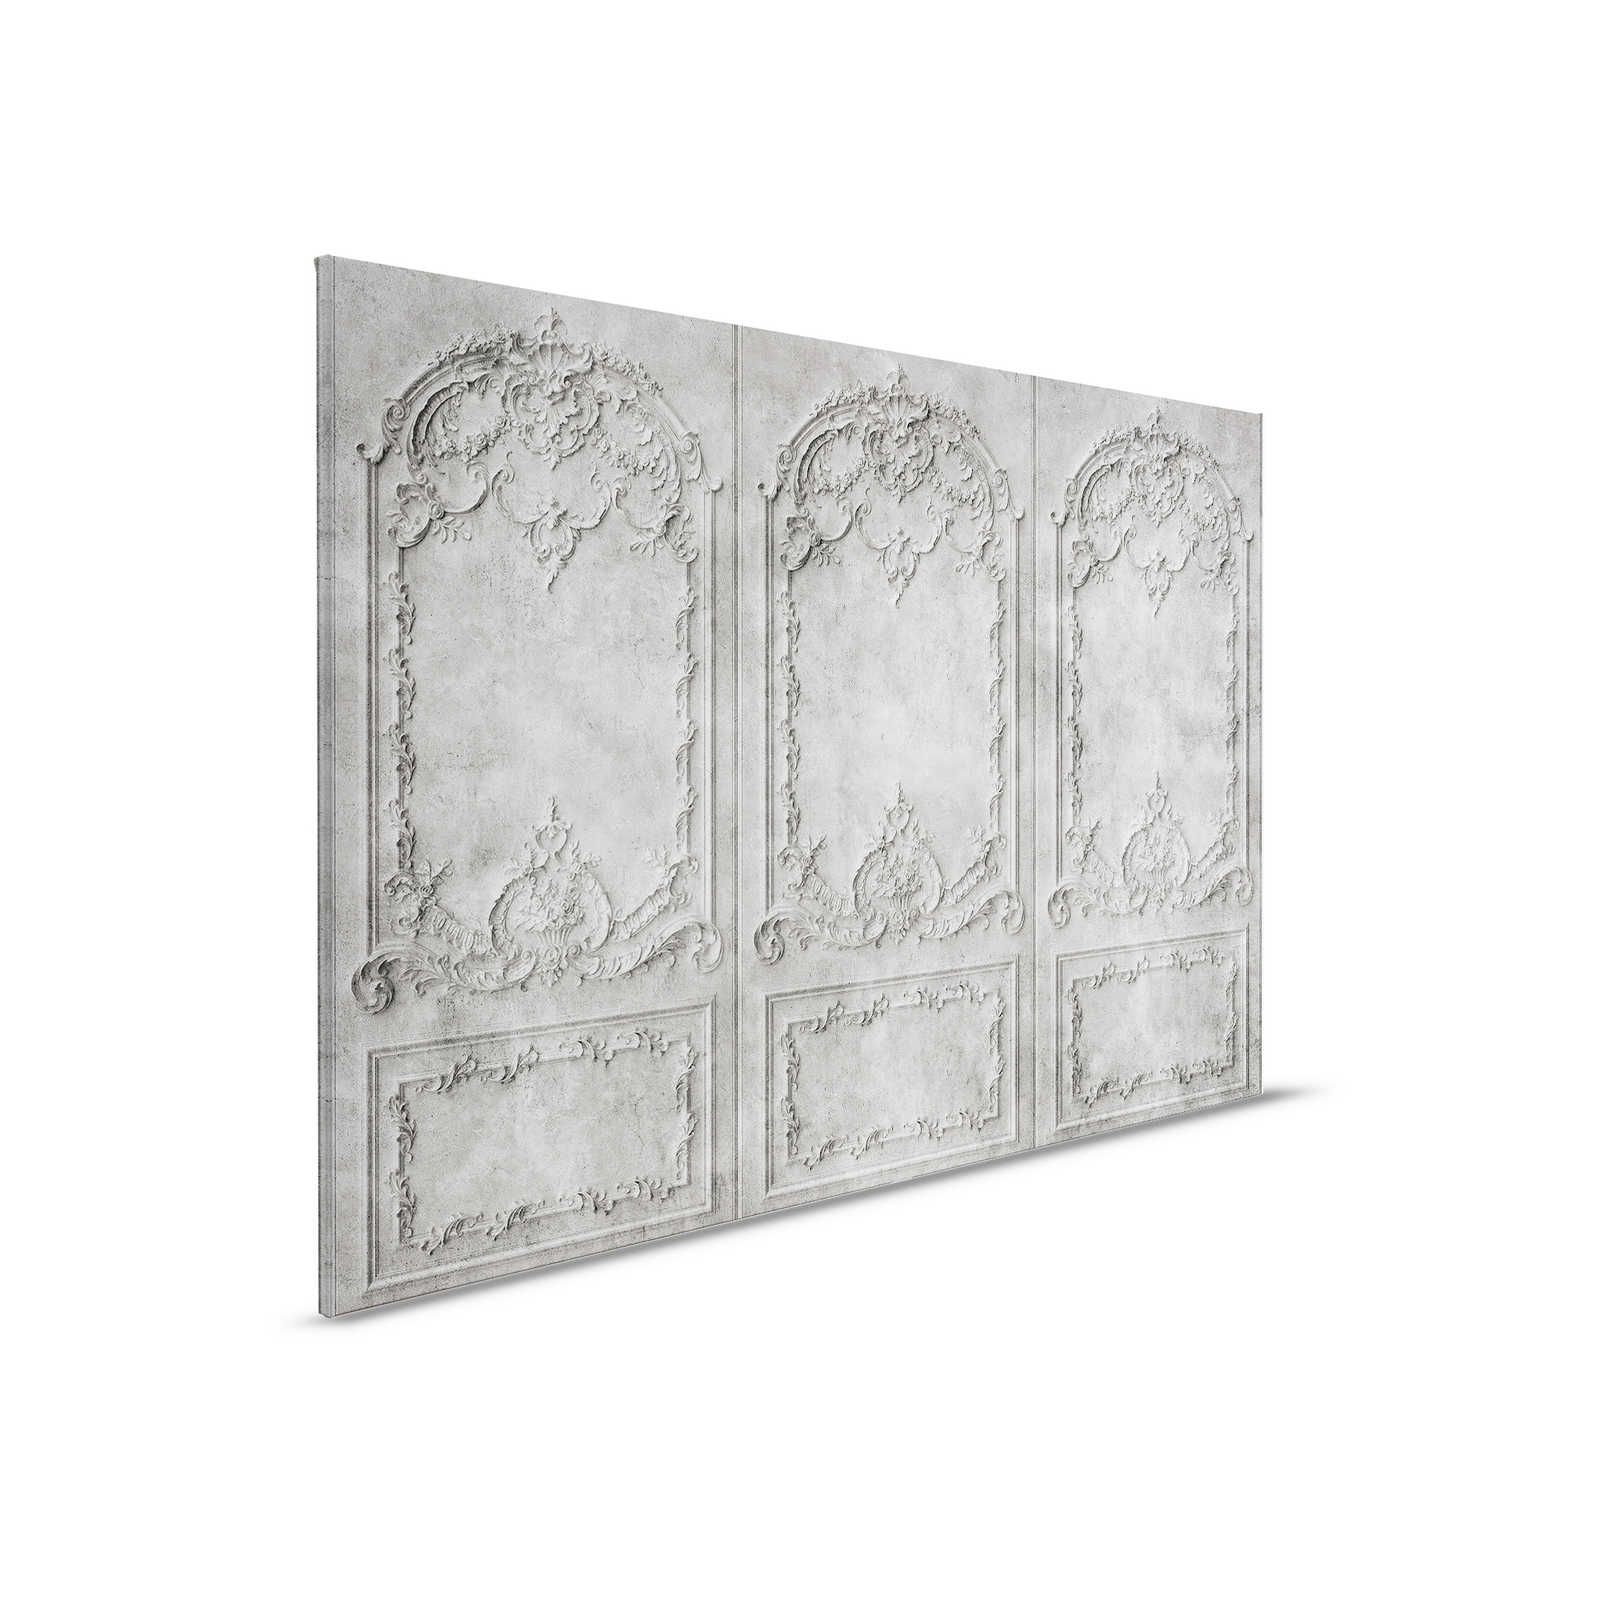 Versailles 2 - Canvas painting Wooden panels Grey in Baroque style - 0.90 m x 0.60 m
